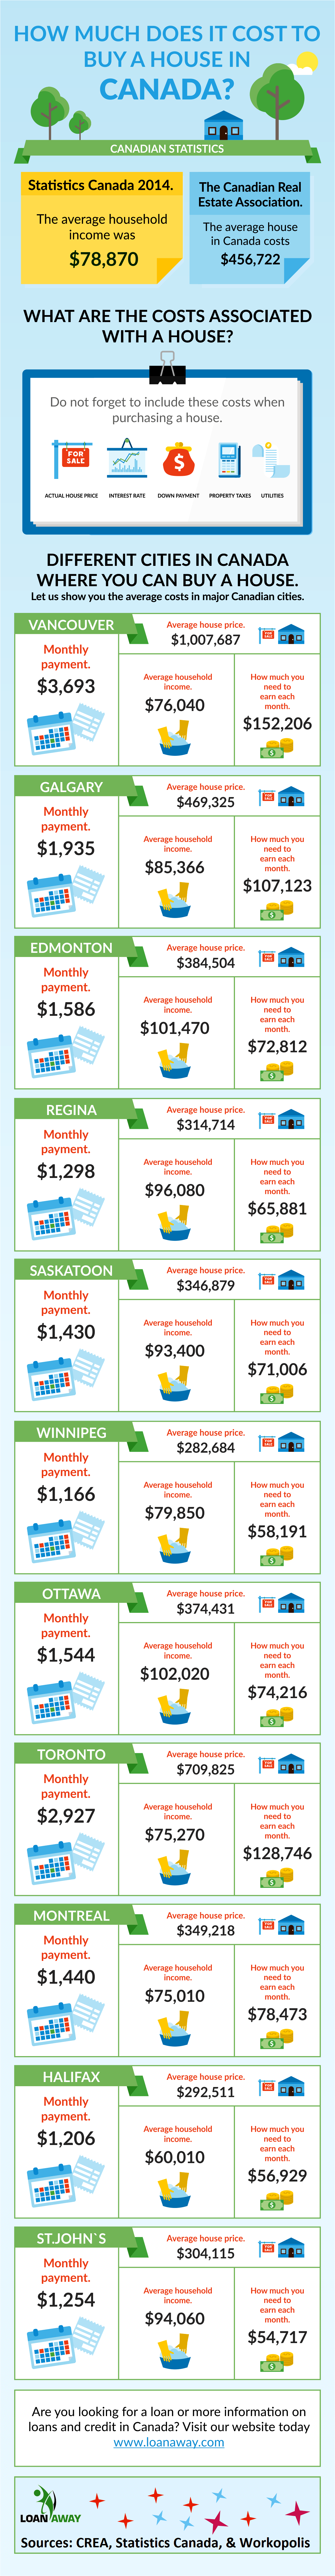 How Much Does It Cost to Buy a House in Canada?